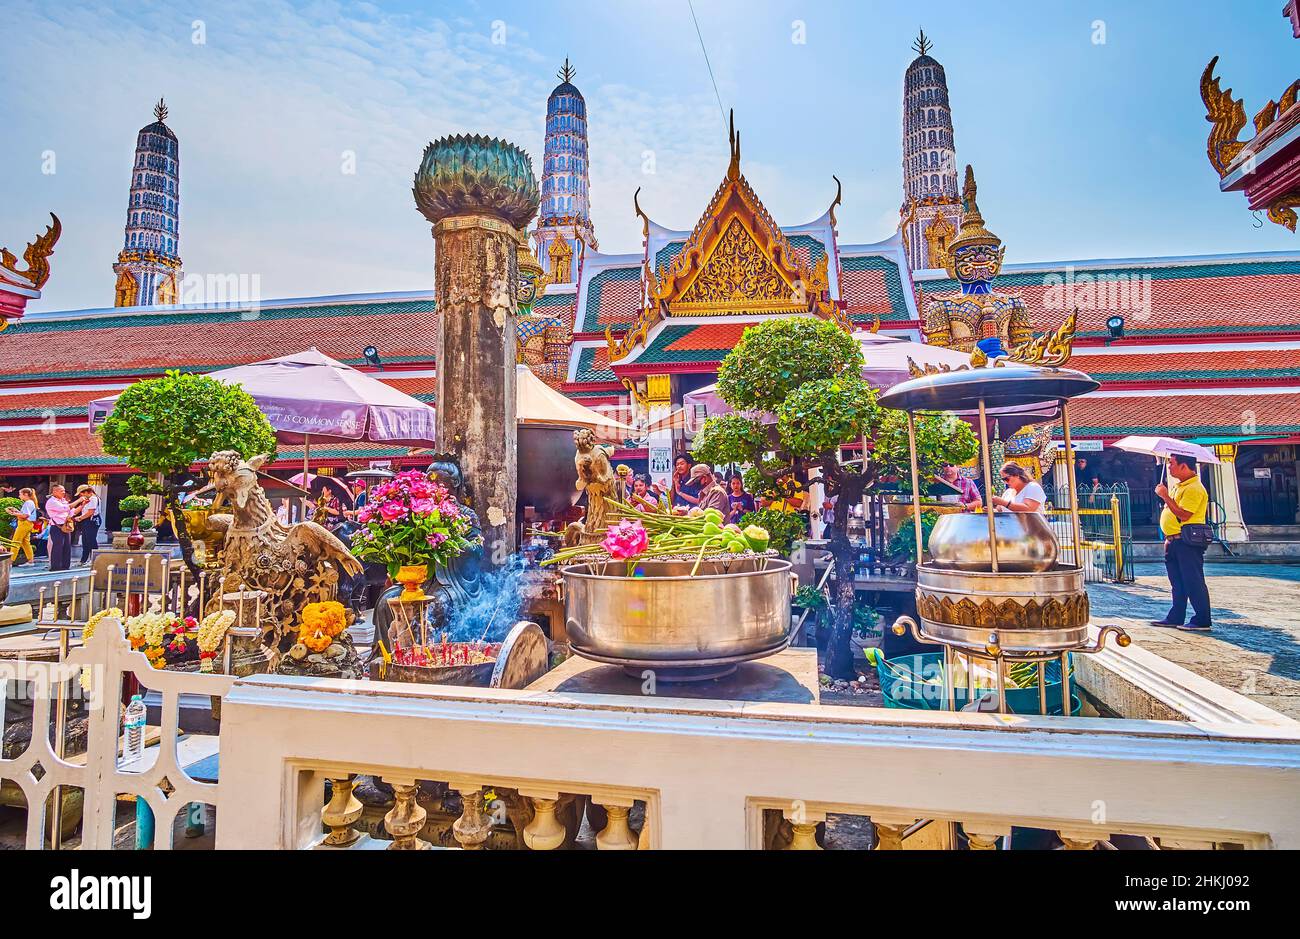 BANGKOK, THAILAND - MAY 12, 2019: The outdoor altar with flower offerings opposite the Ubosot of Emerald Buddha Temple in Grand Palace, on May 12 in B Stock Photo